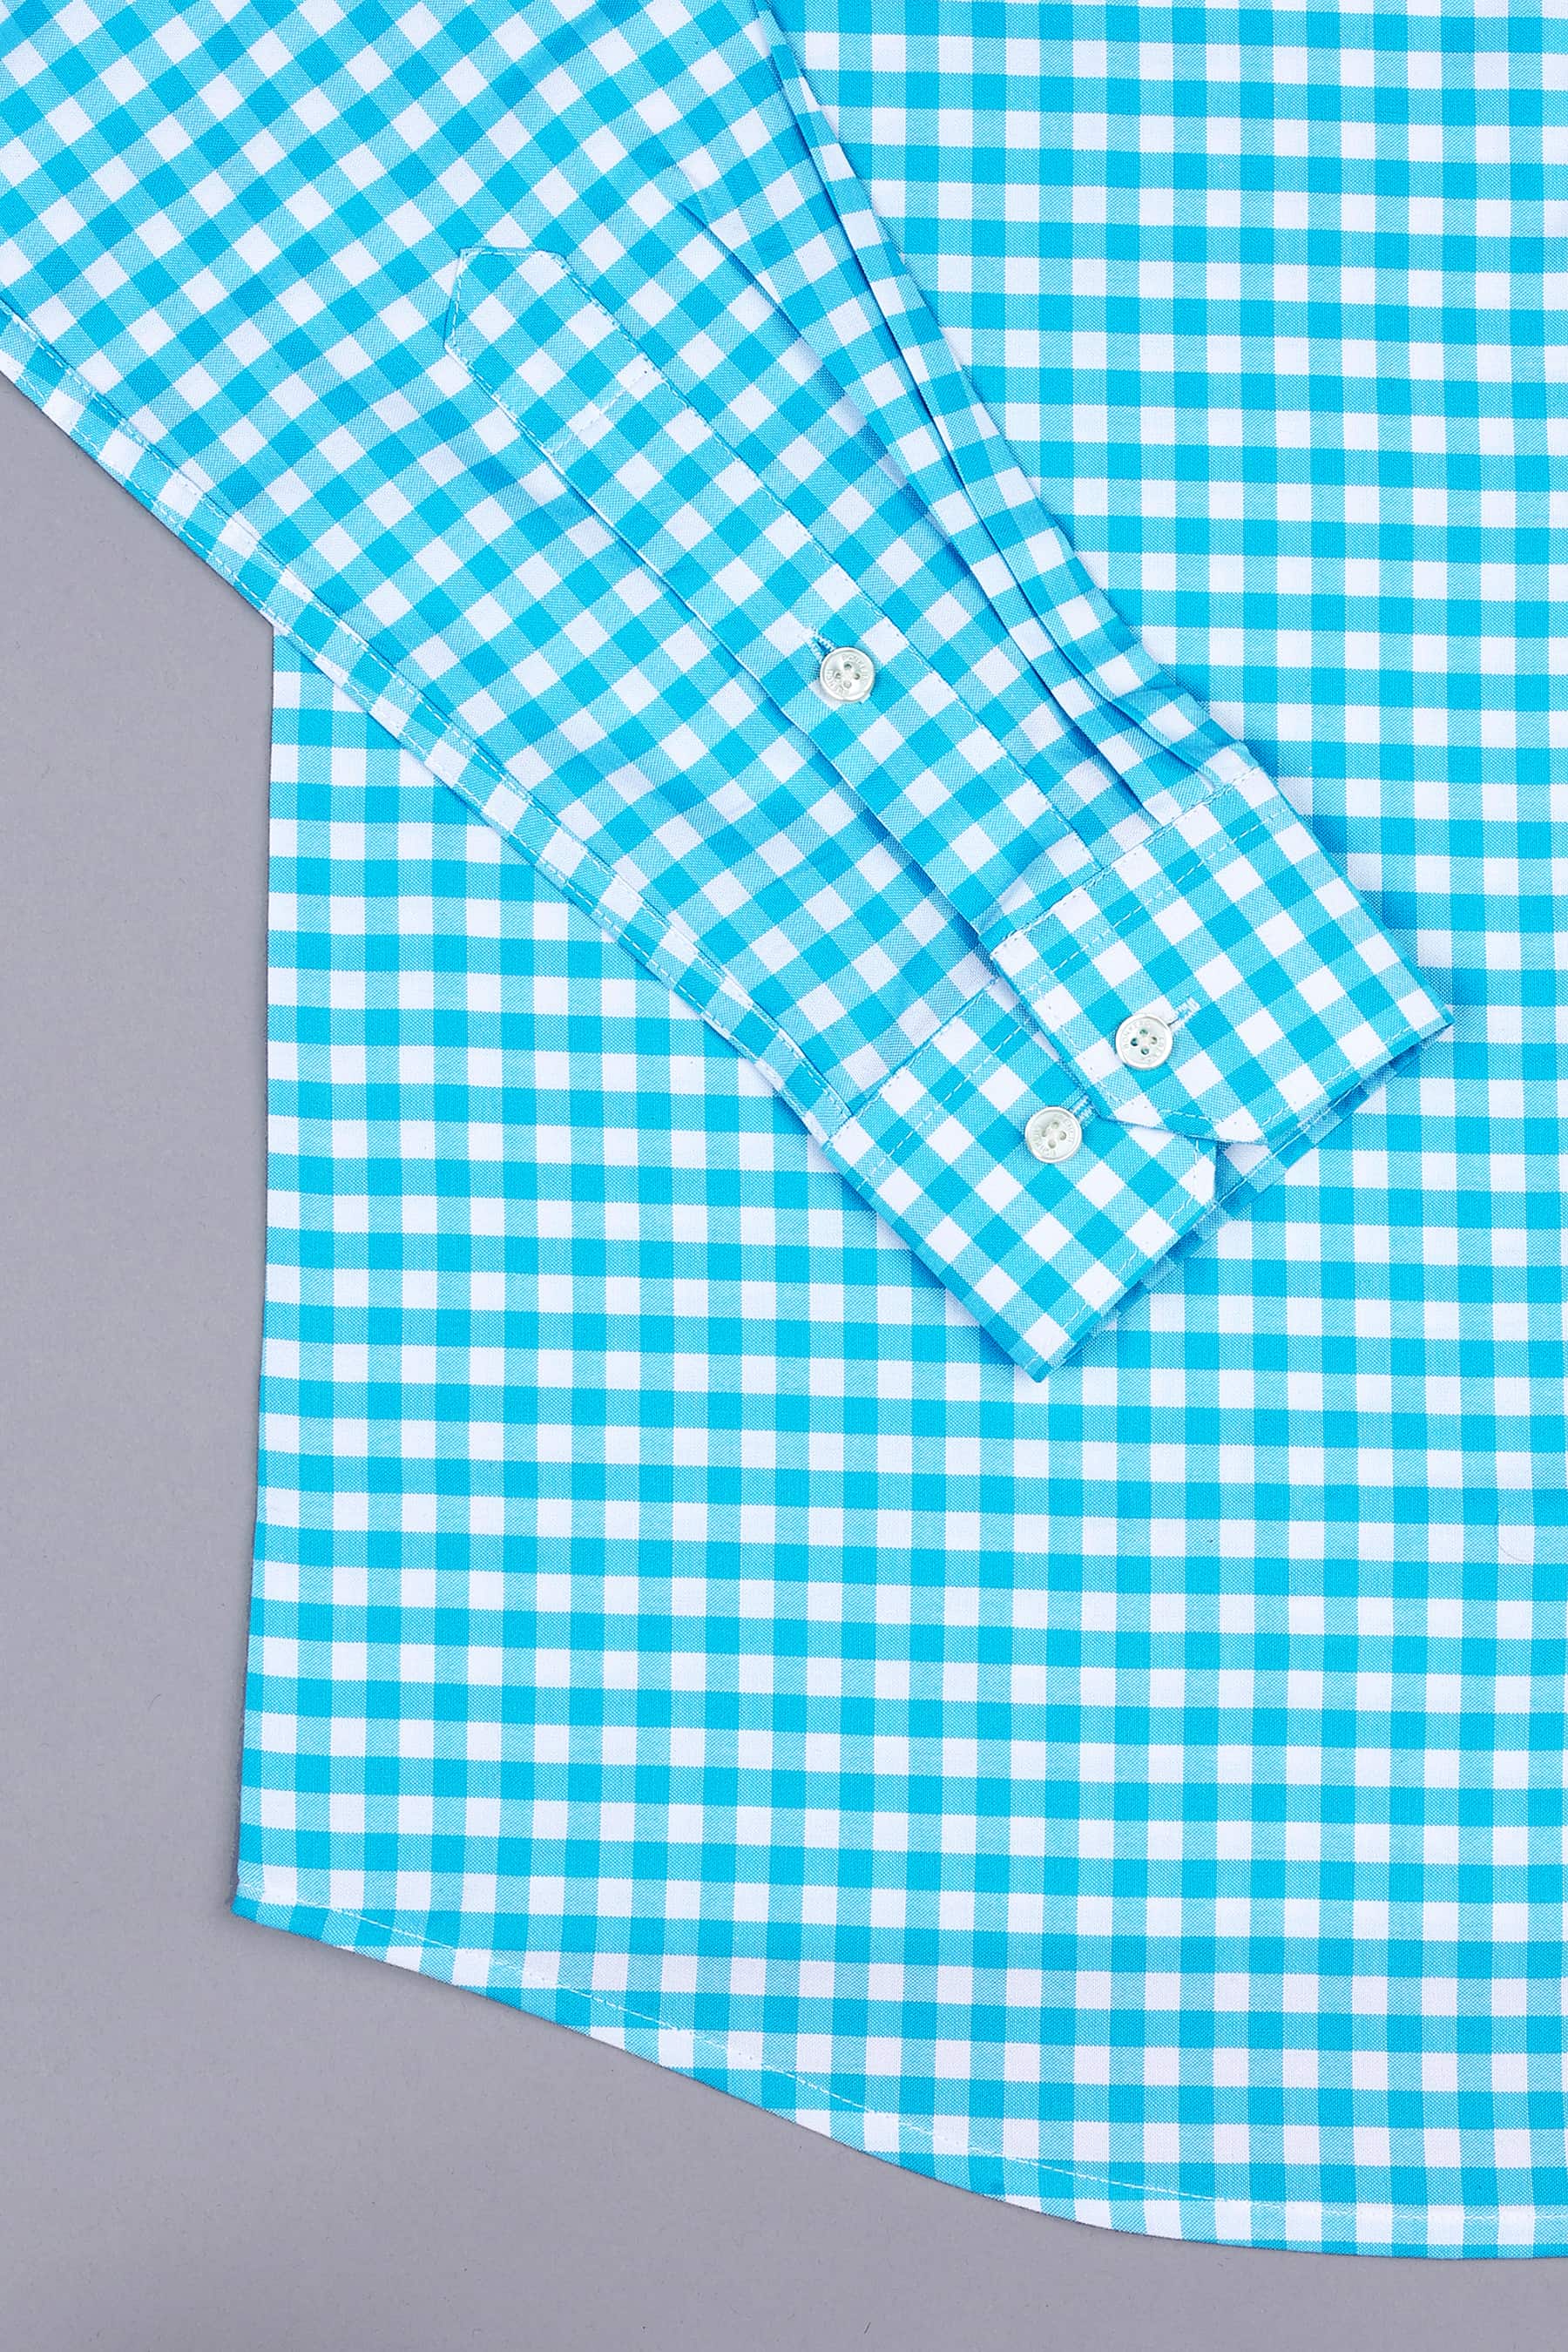 Vivid skyblue with white oxford gingham check shirt